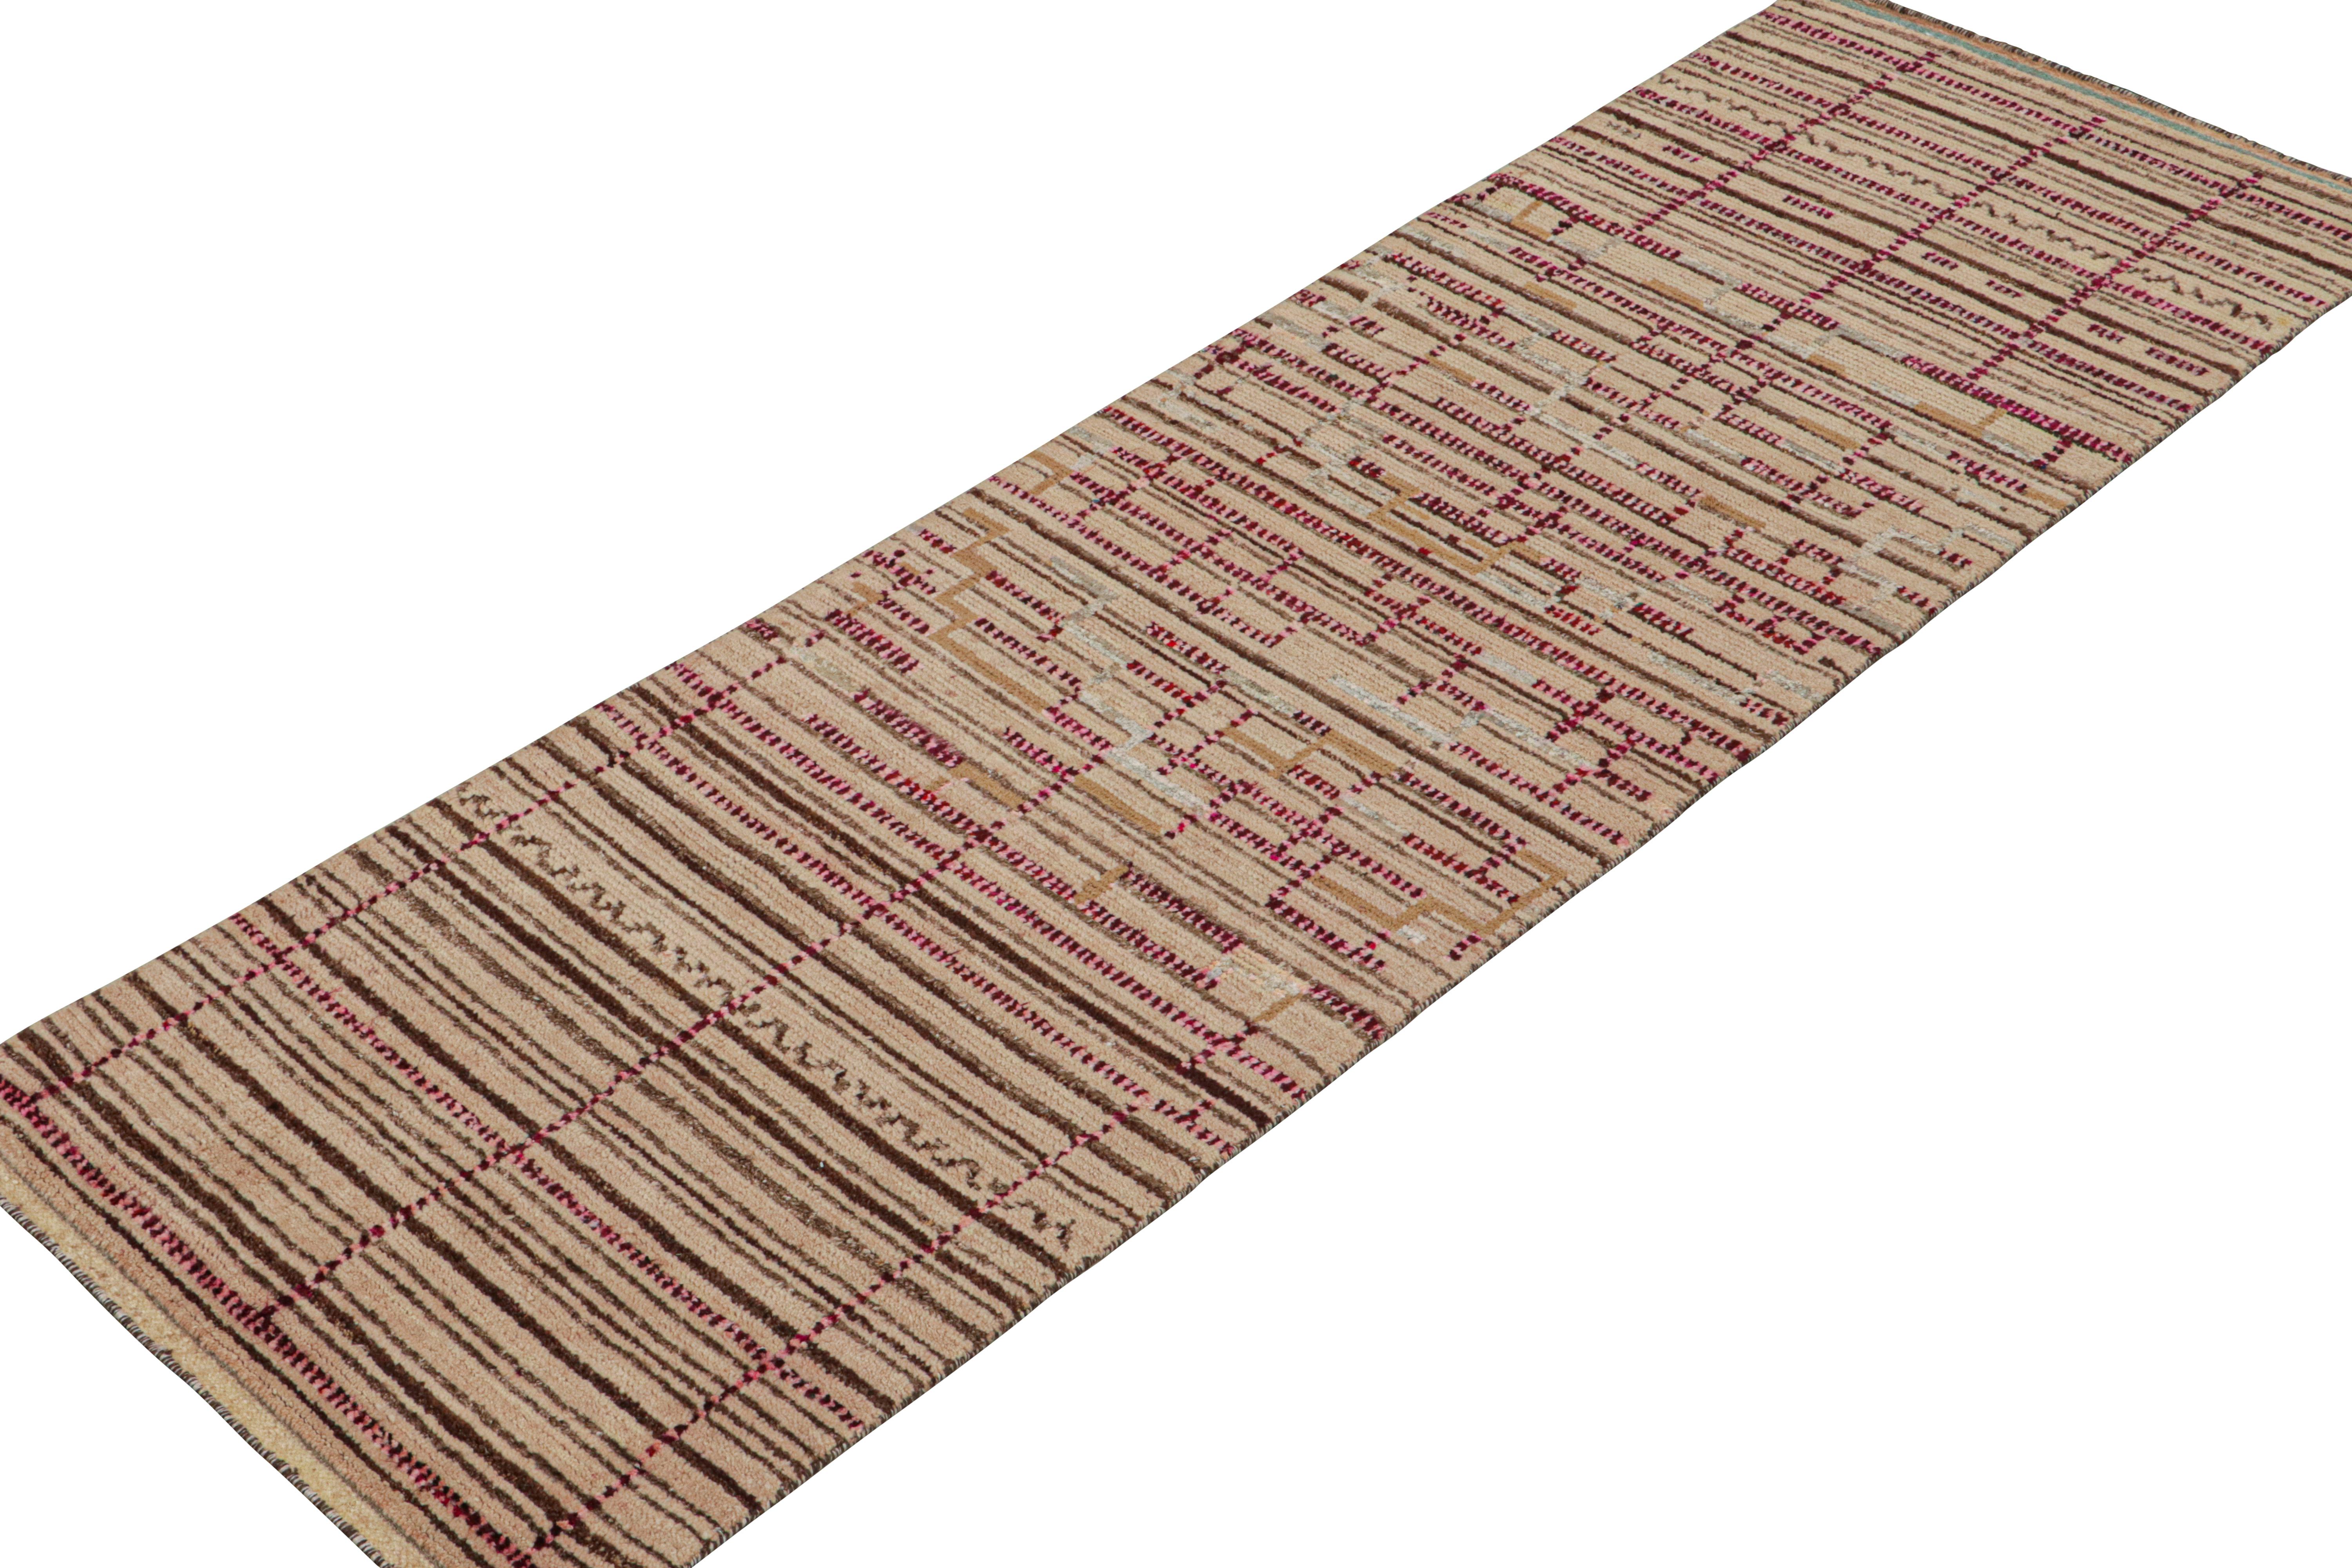 Tribal Rug & Kilim’s Moroccan Style Runner in Beige-Brown and Pink Geometric Patterns For Sale